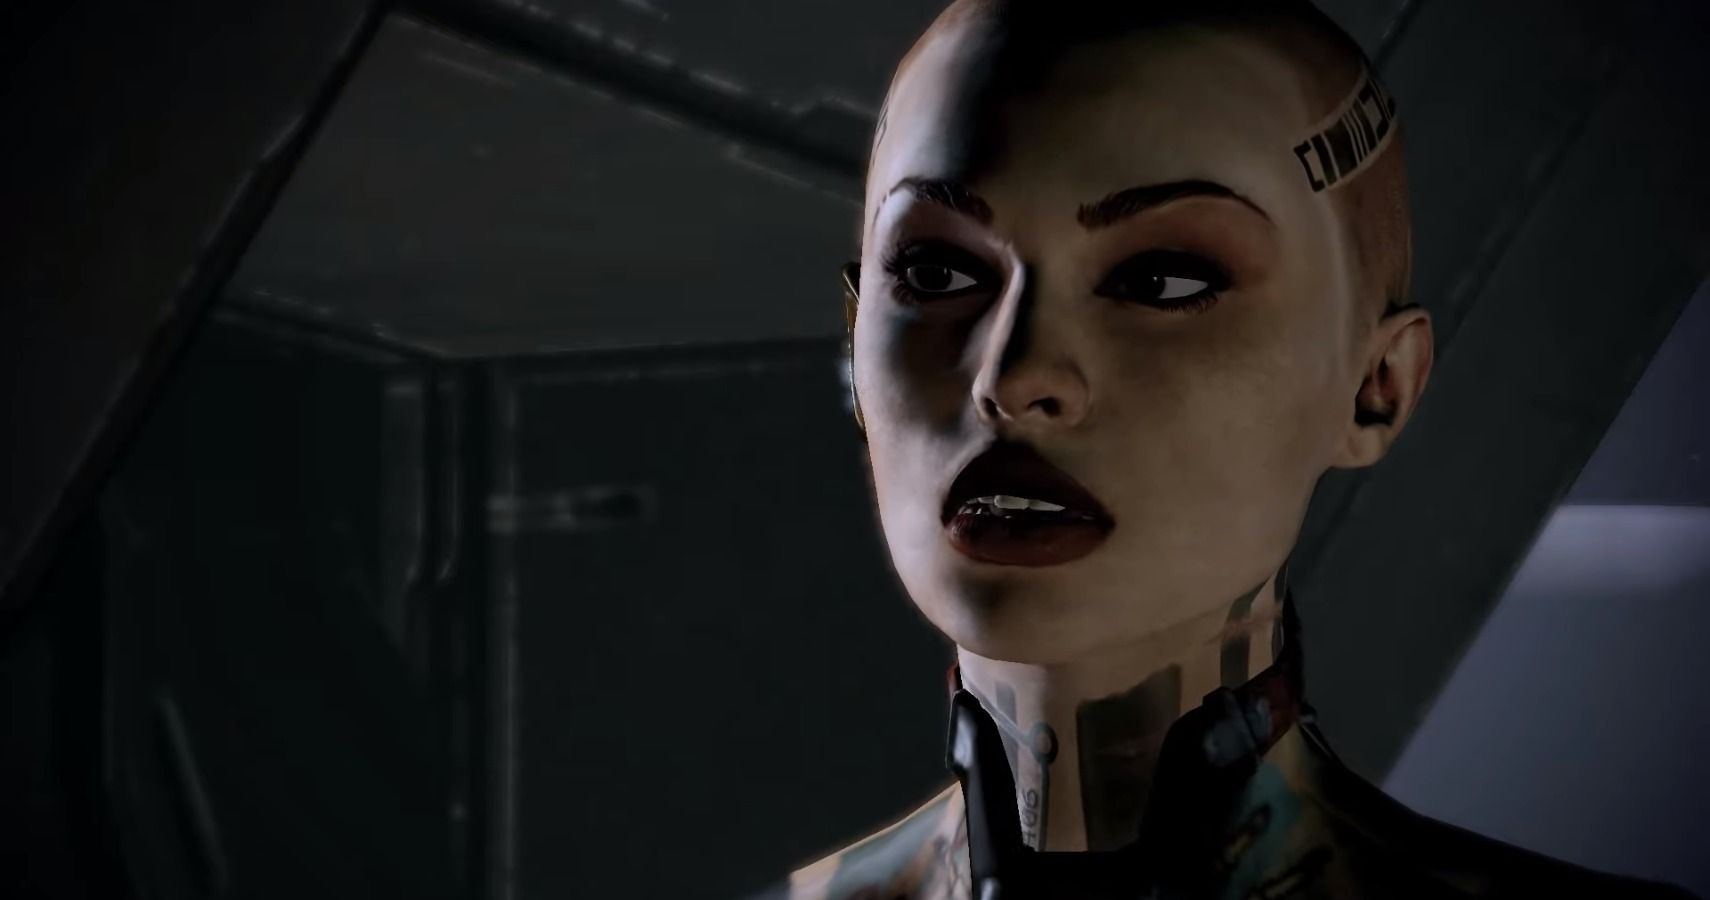 Mass Effect 2’s Jack was originally pansexual, but non-heterosexual novels were eliminated because of Fox News